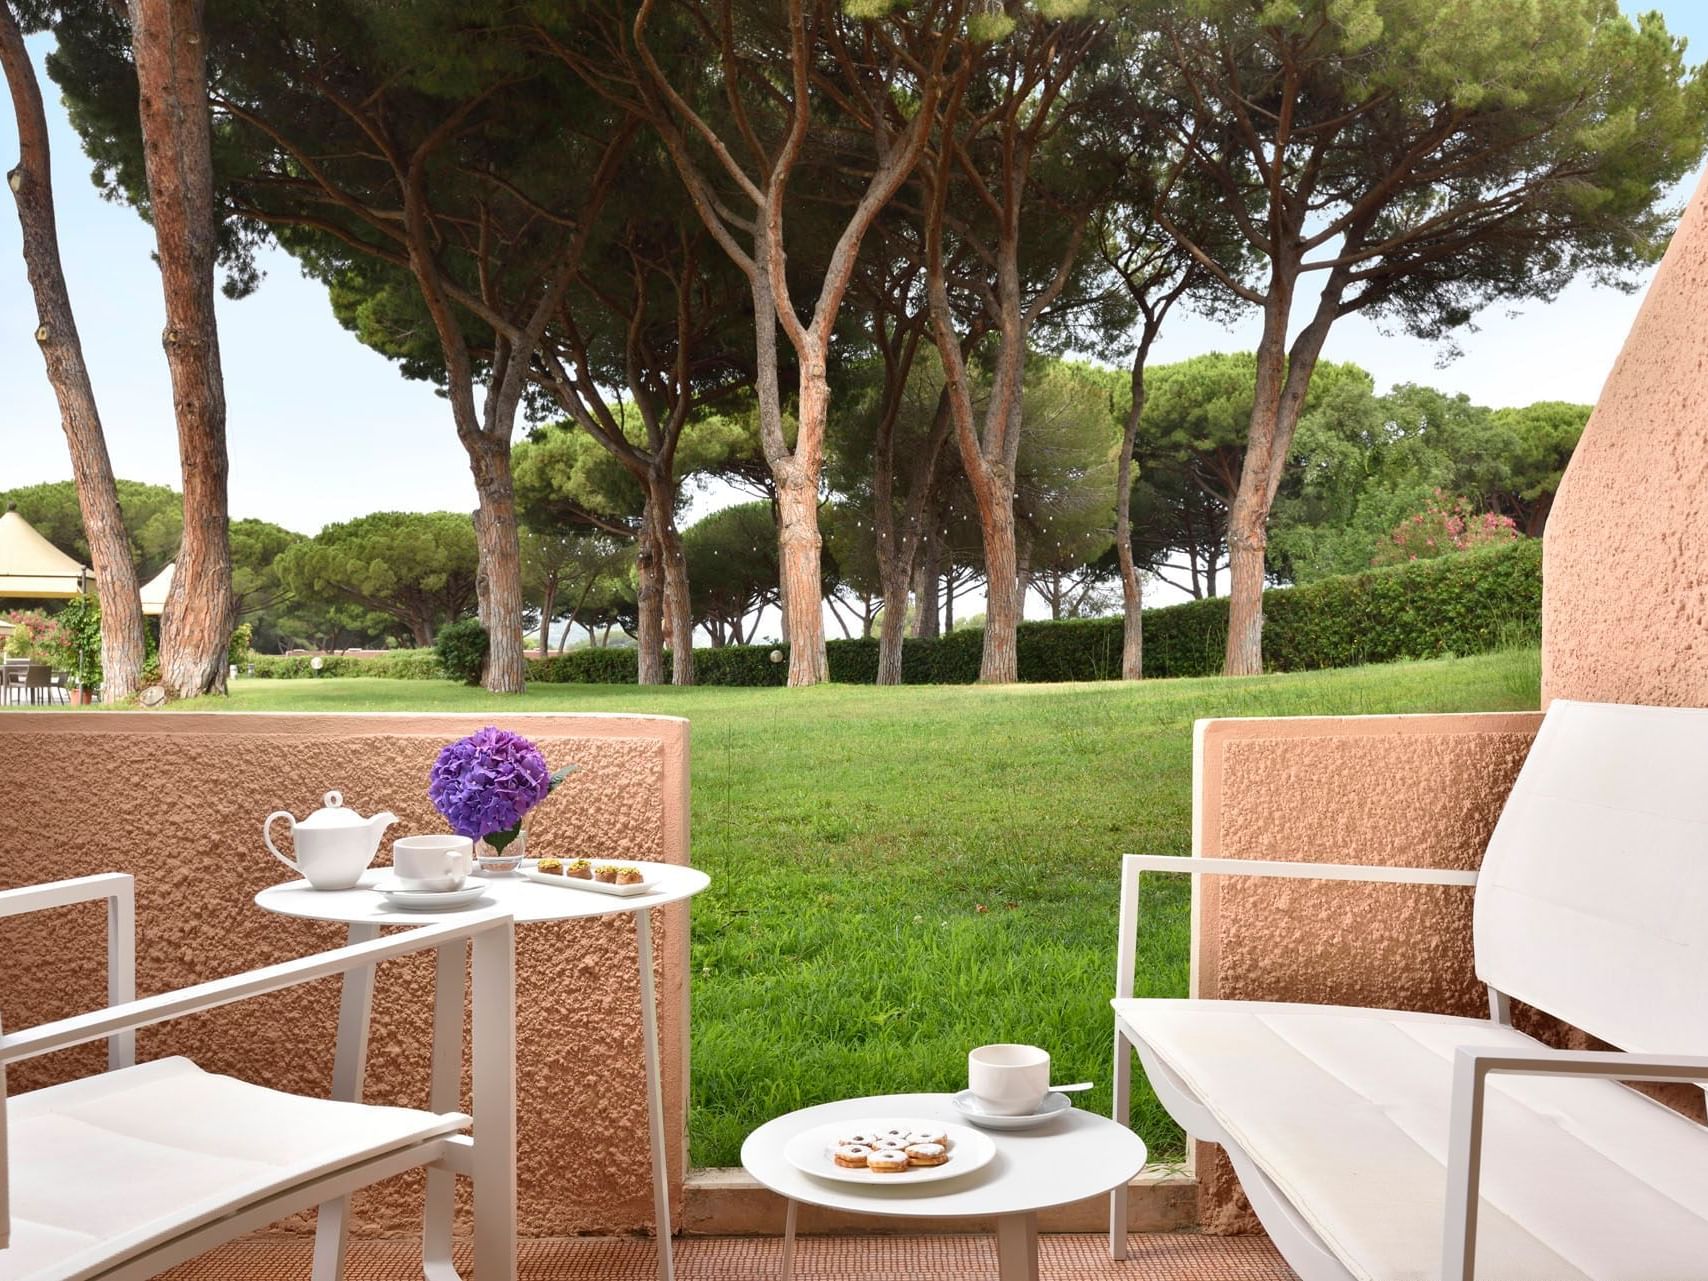 Tea served on a Suite terrace at Golf Hotel Punta Ala